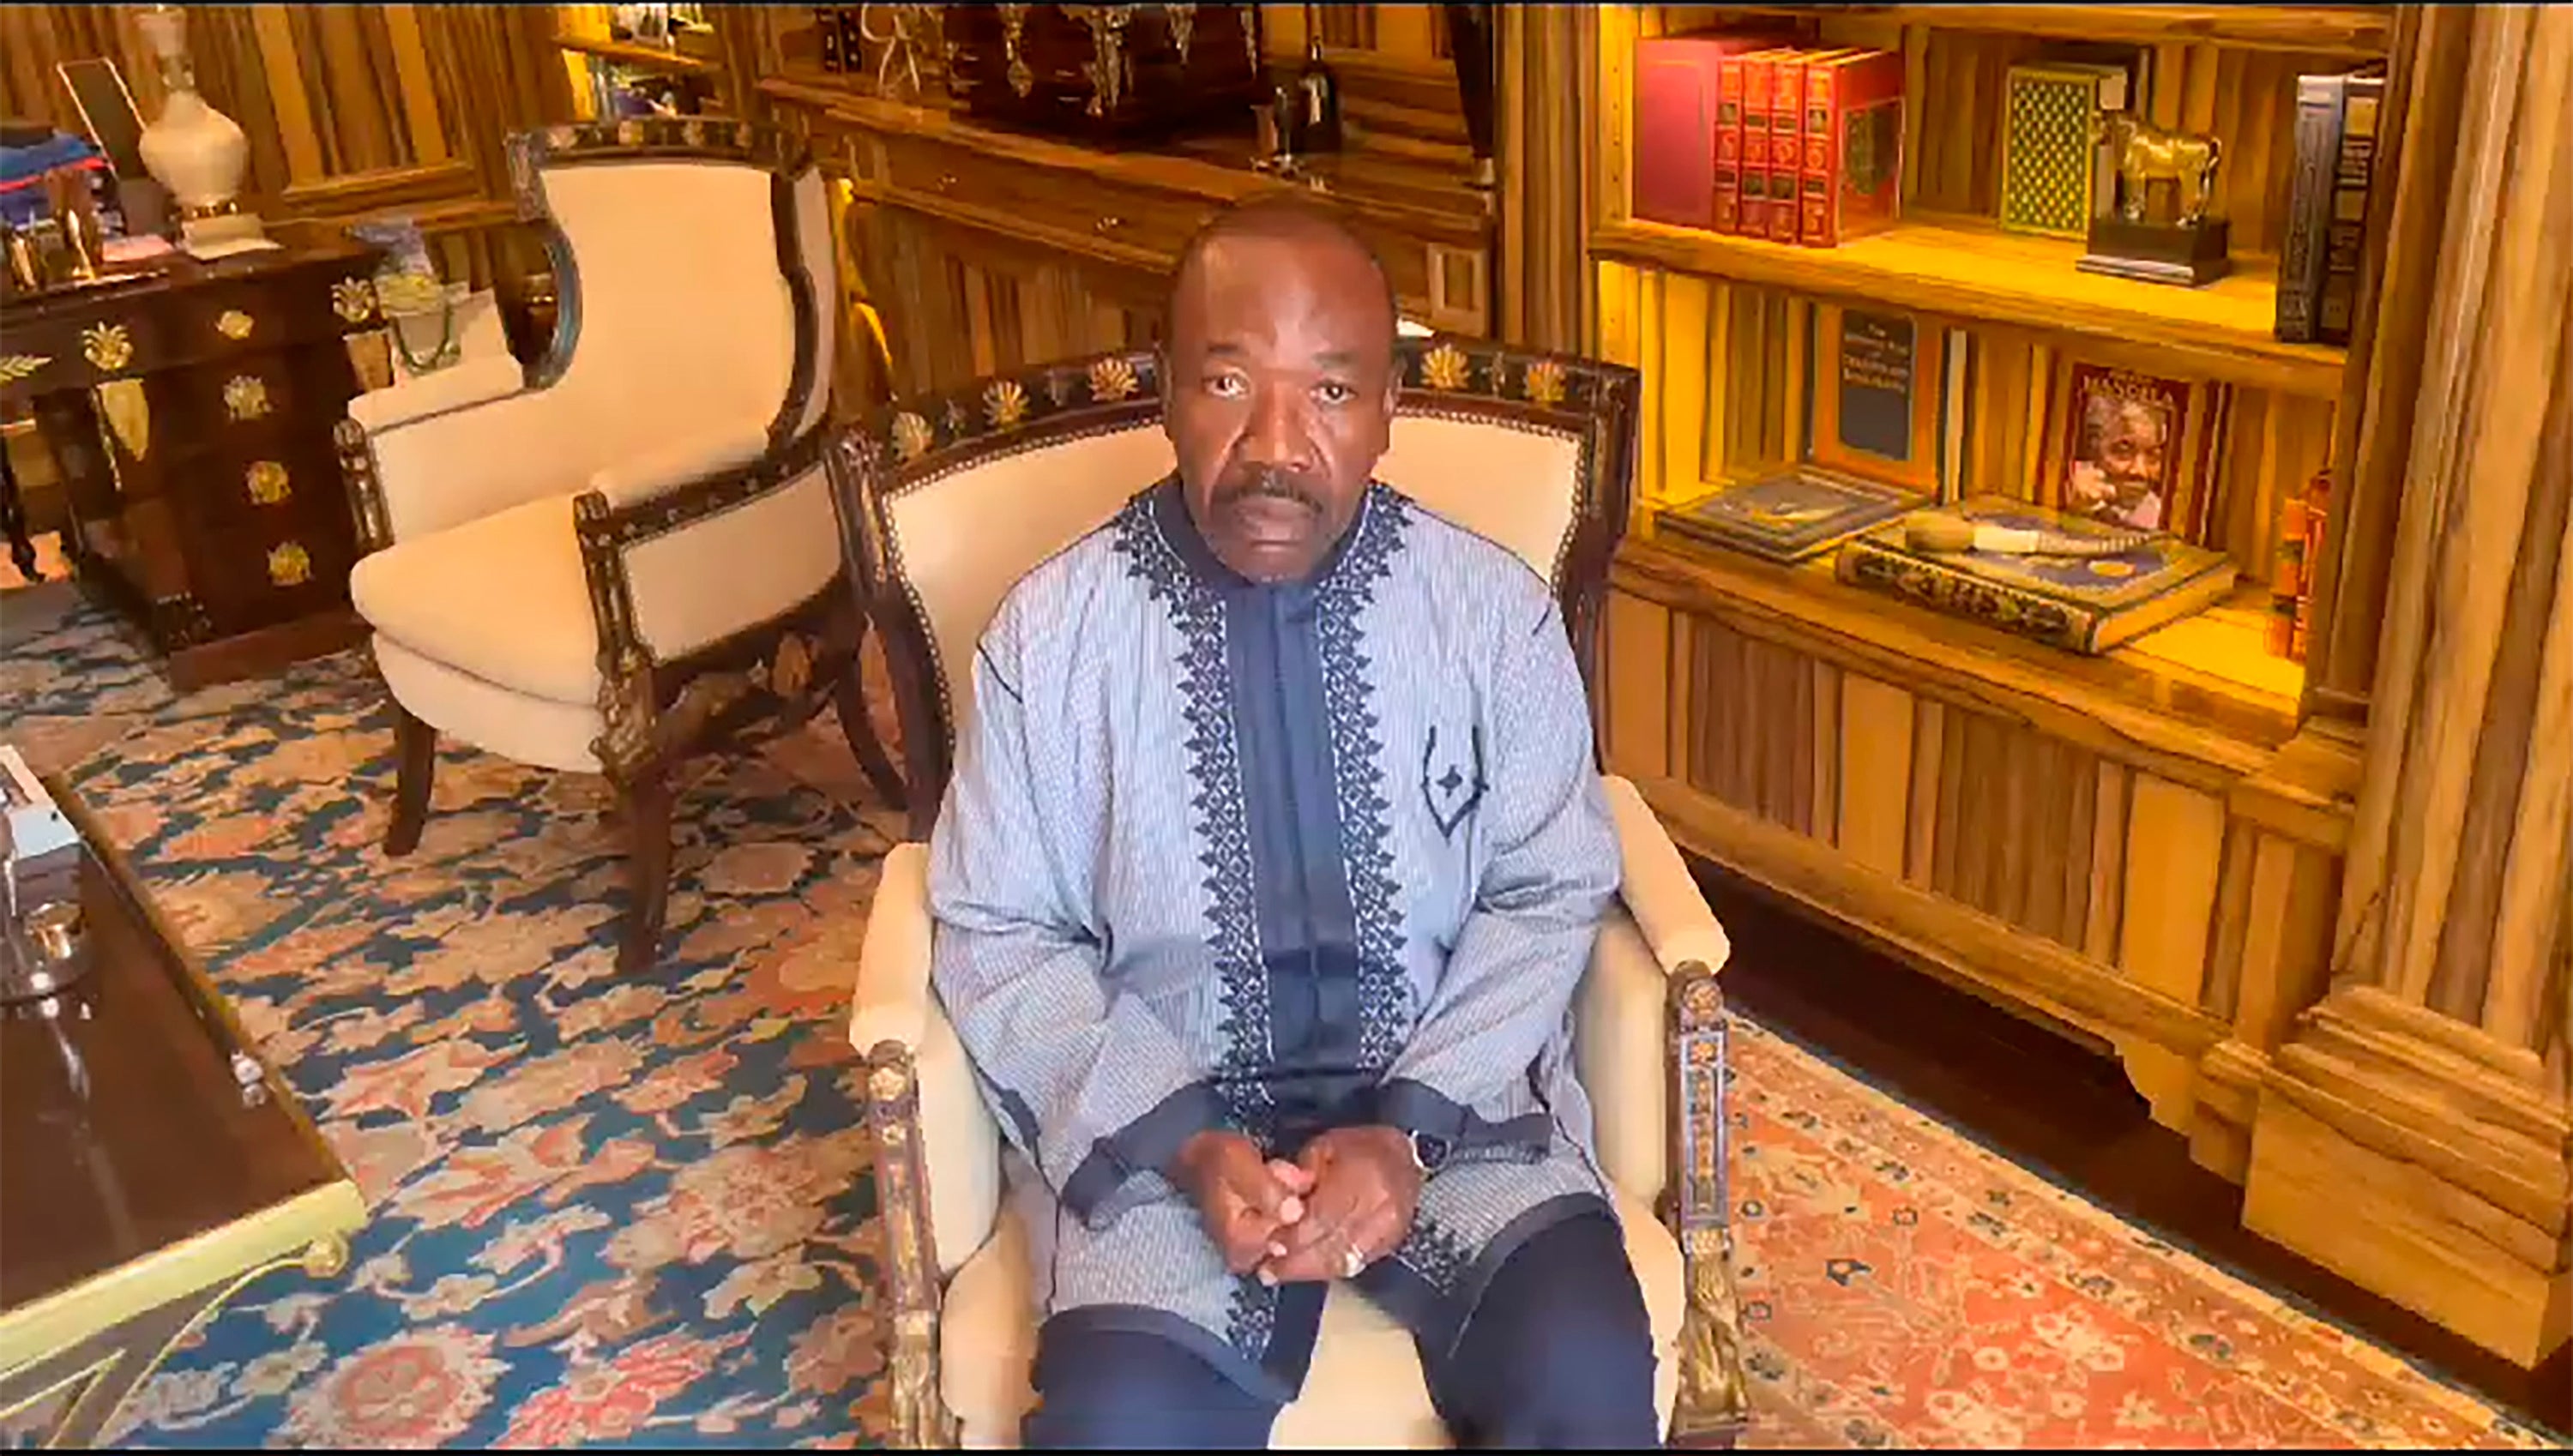 Gabon president Ali Bongo Ondimba records a video from his residence in Libreville, calling on supporters to make ‘noise’